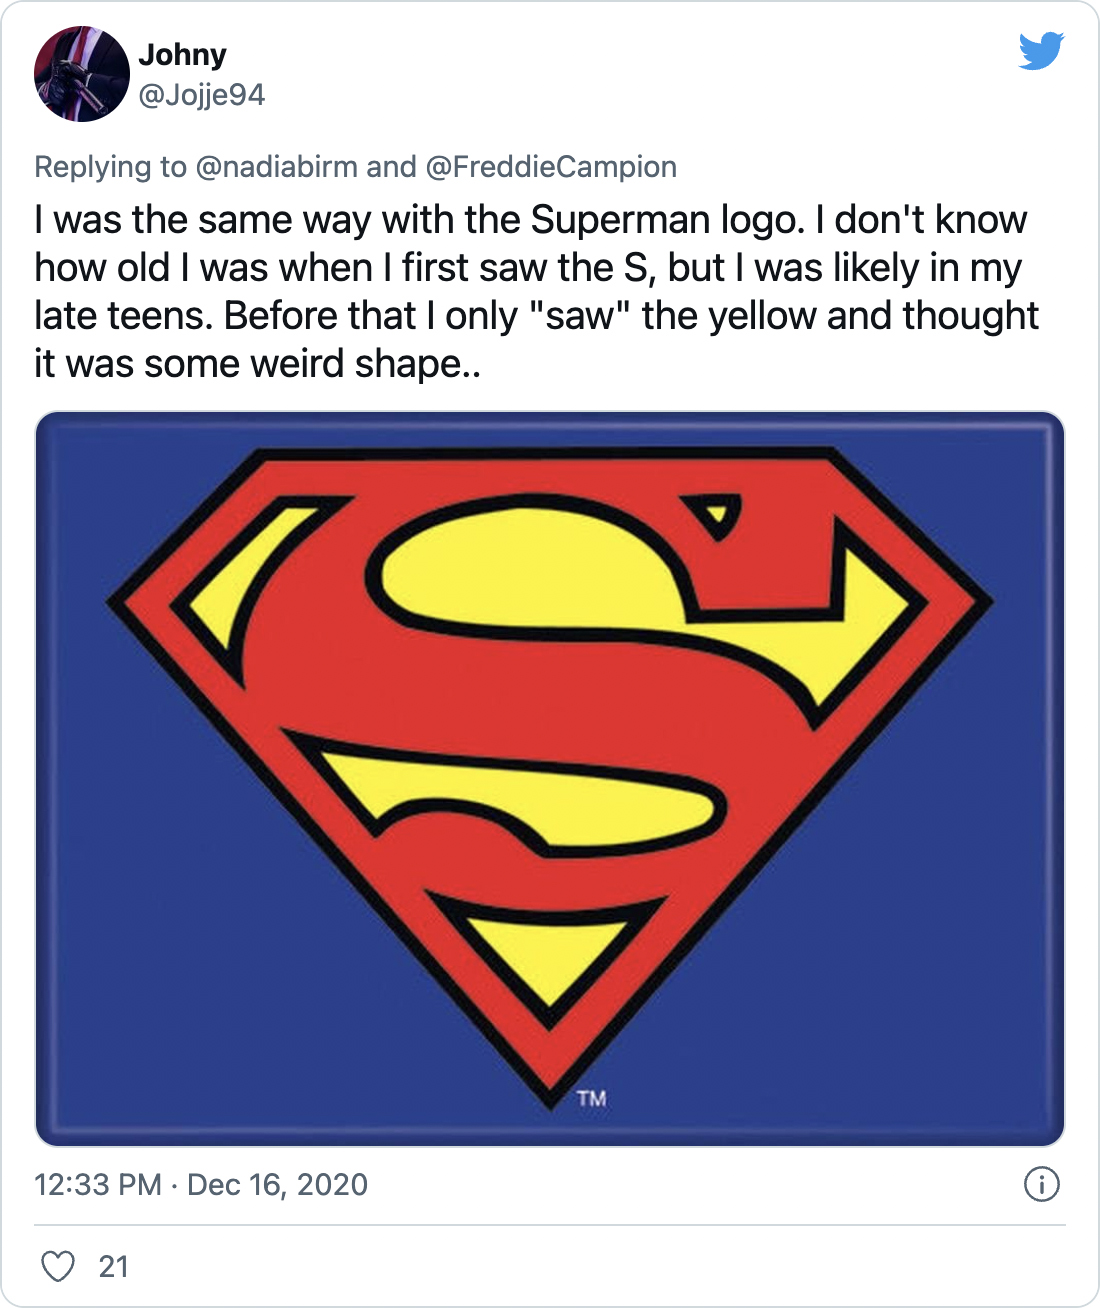 I was the same way with the Superman logo. I don't know how old I was when I first saw the S, but I was likely in my late teens. Before that I only "saw" the yellow and thought it was some weird shape.. - @Jojje94